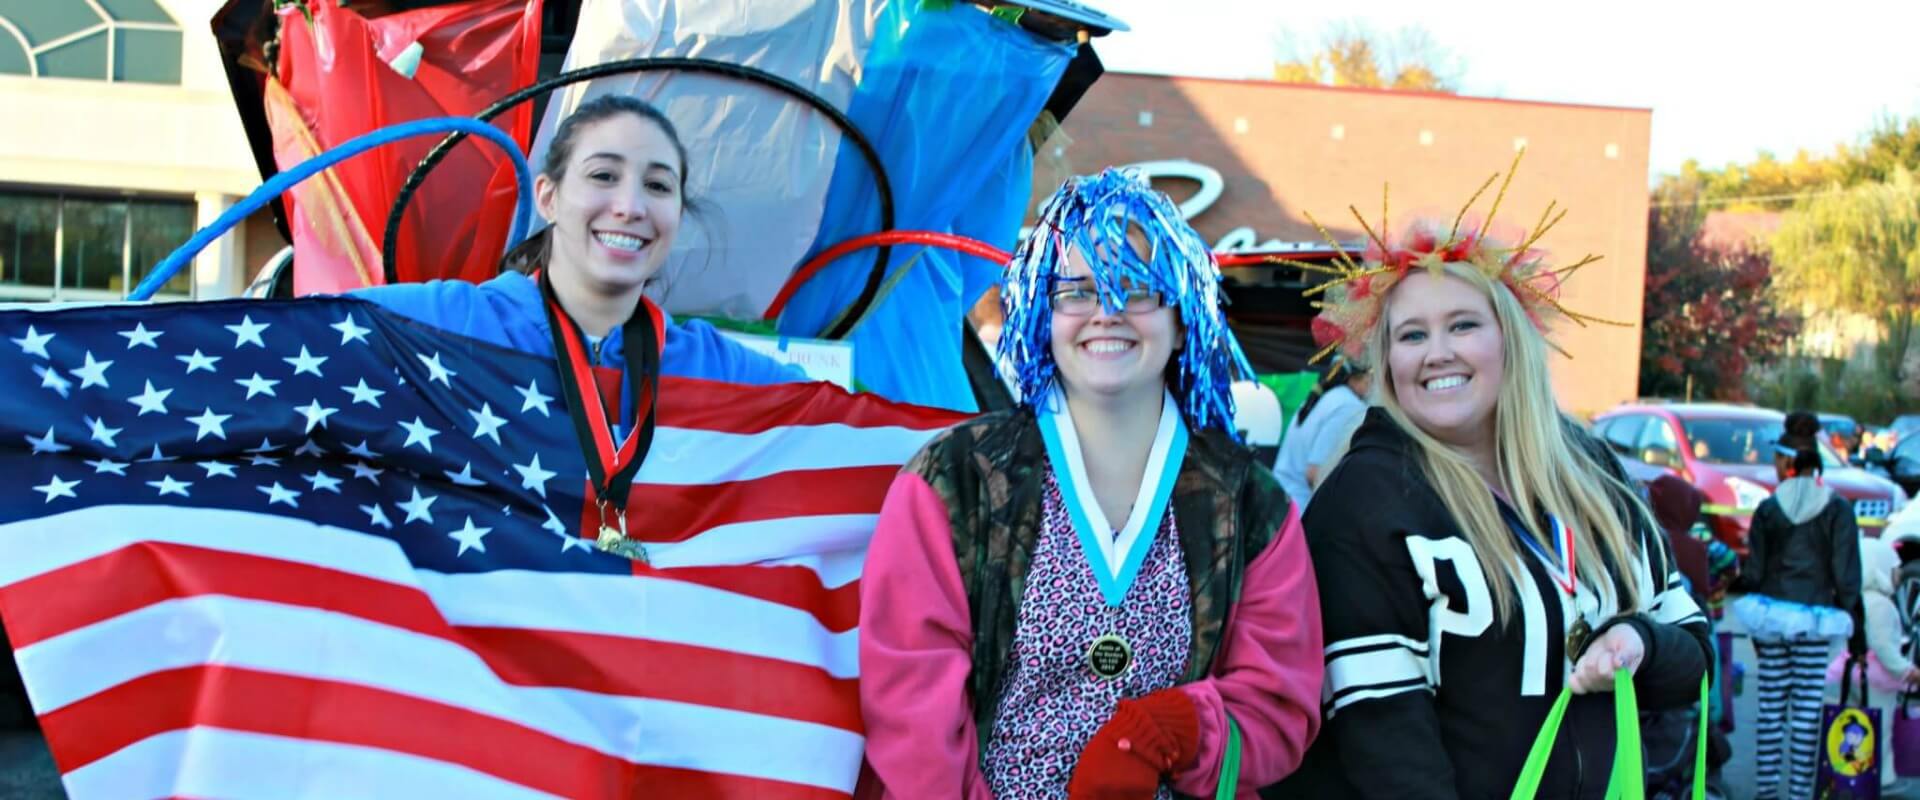 Kids & costumes from Trunk or Treat at BACHC